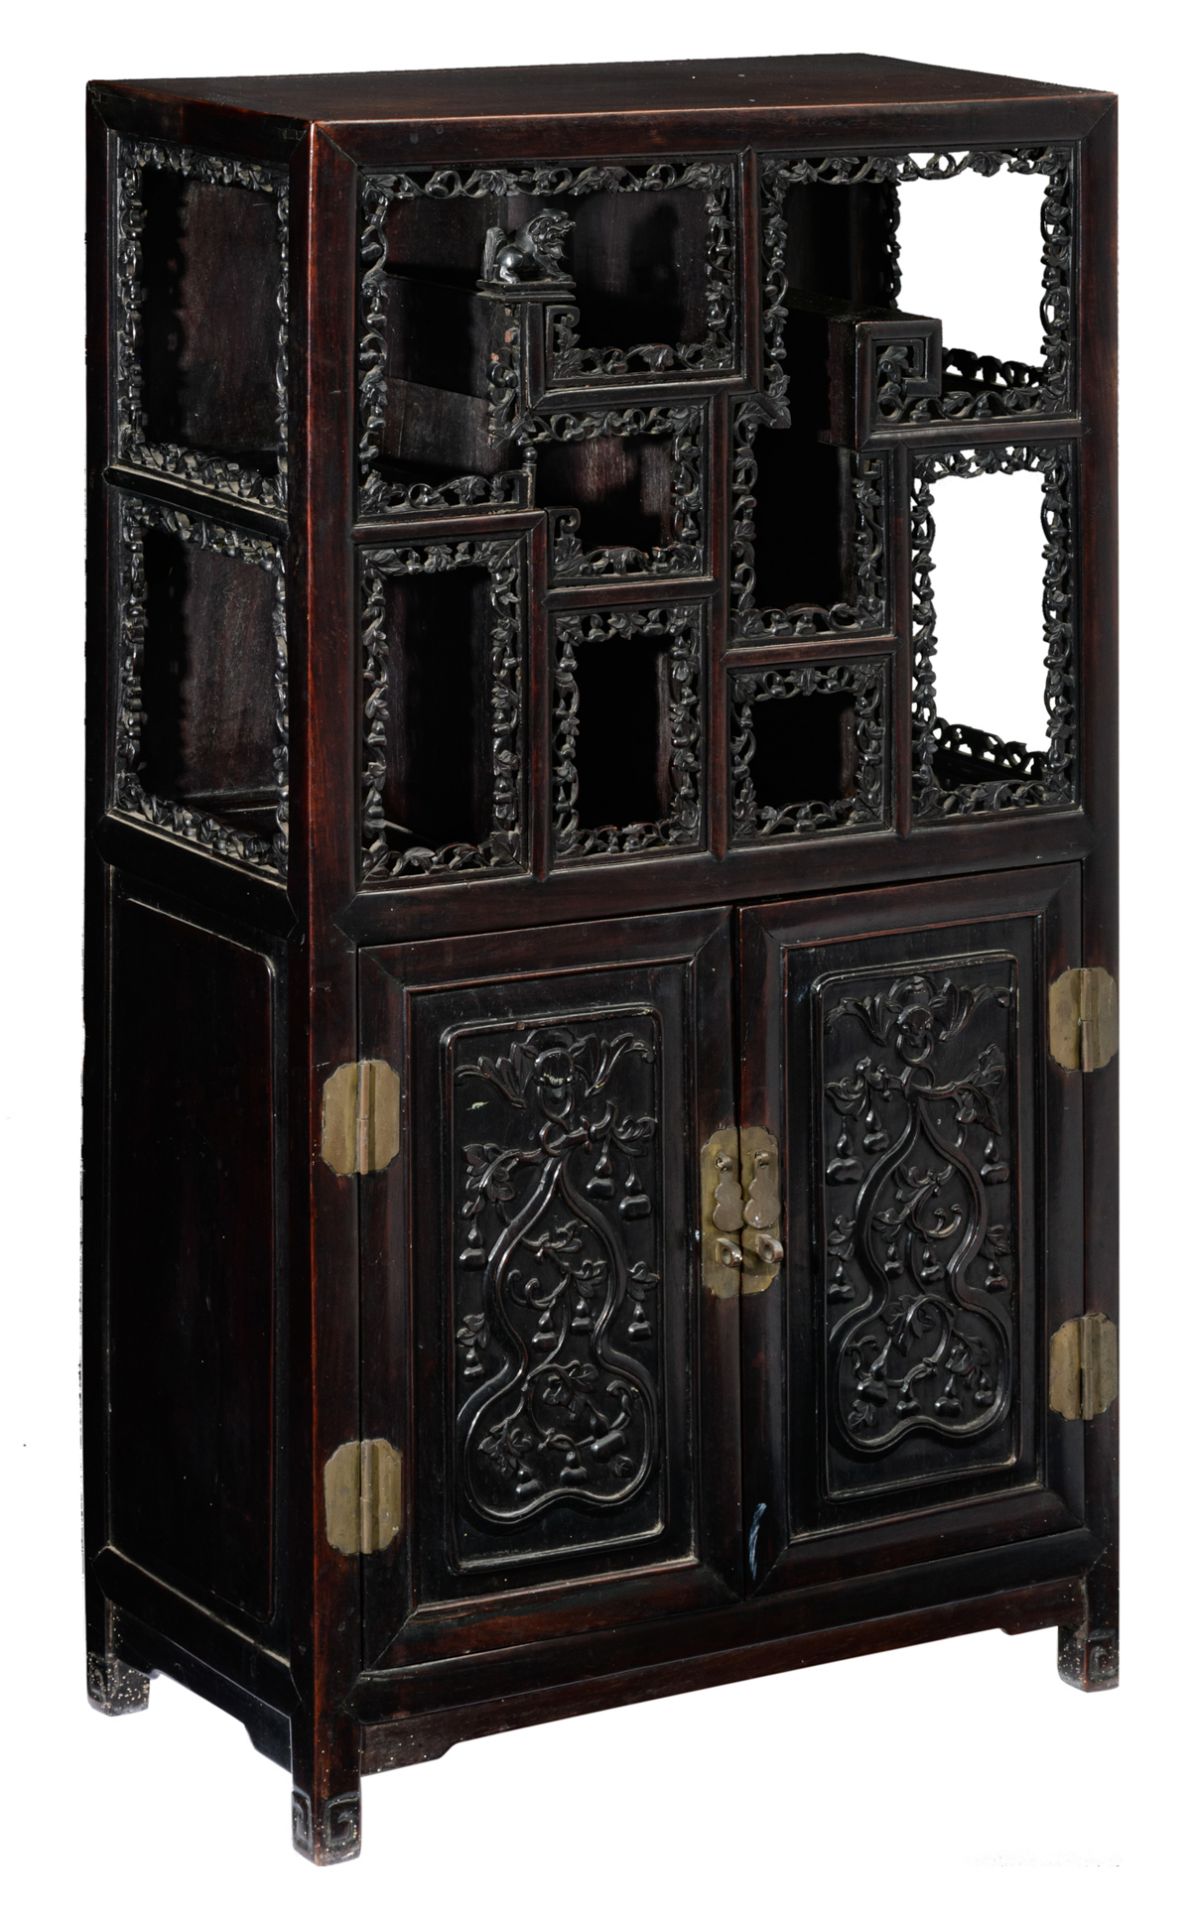 A Chinese exotic hardwood display cabinet, with richly carved open work bands and brass mounts, deco